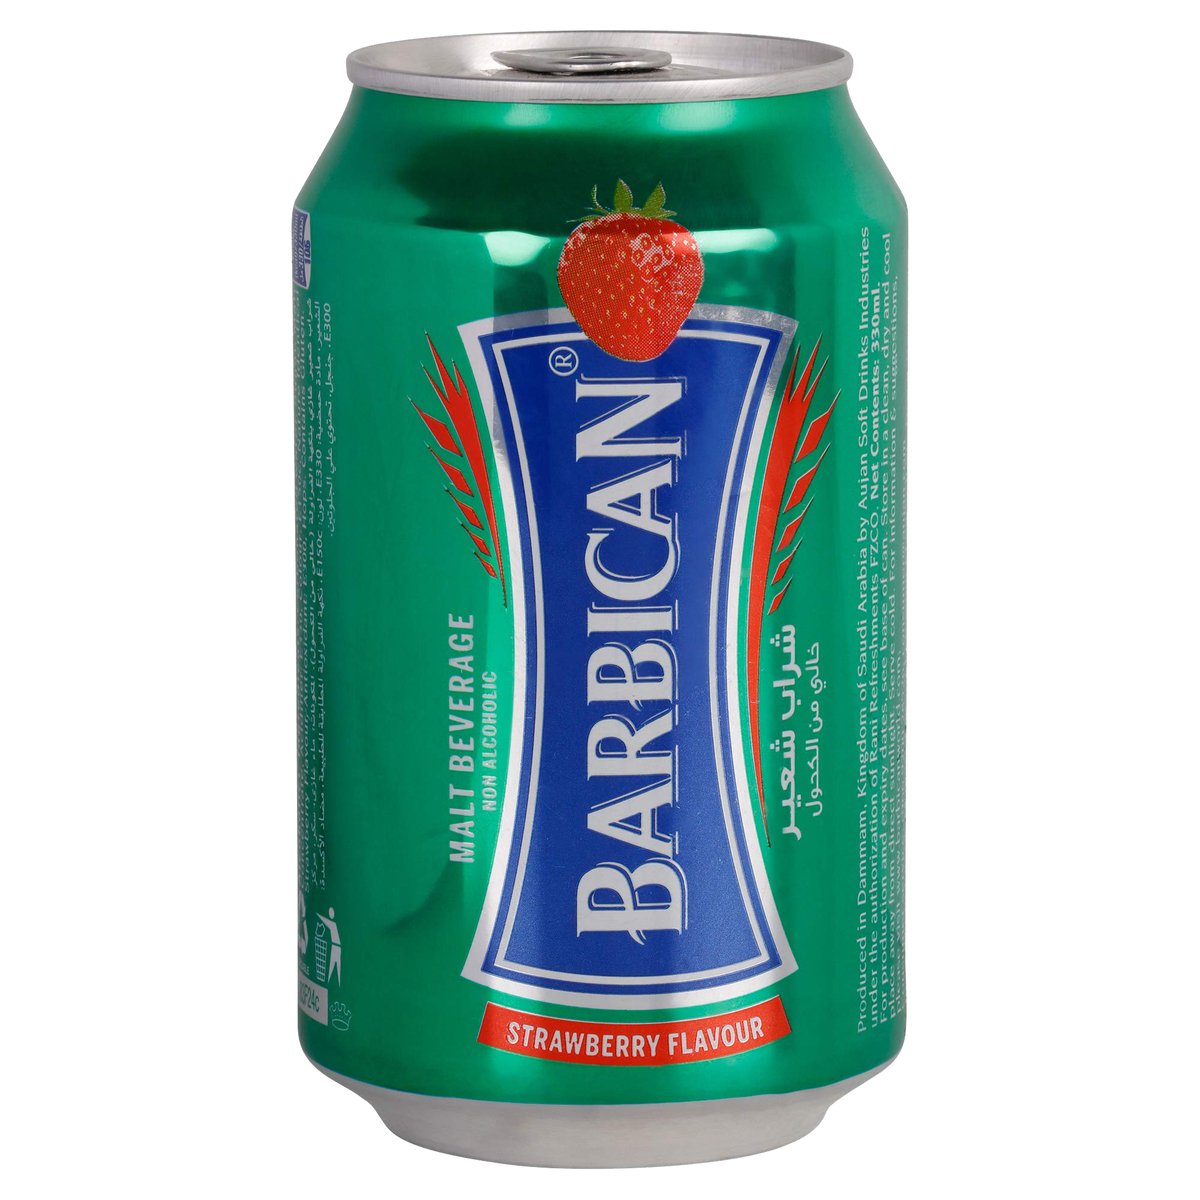 Buy Barbican Strawberry Flavour Non Alcoholic Malt Beverage 6 x 330 ml Online at Best Price | Non Alcoholic Beer | Lulu Kuwait in Kuwait